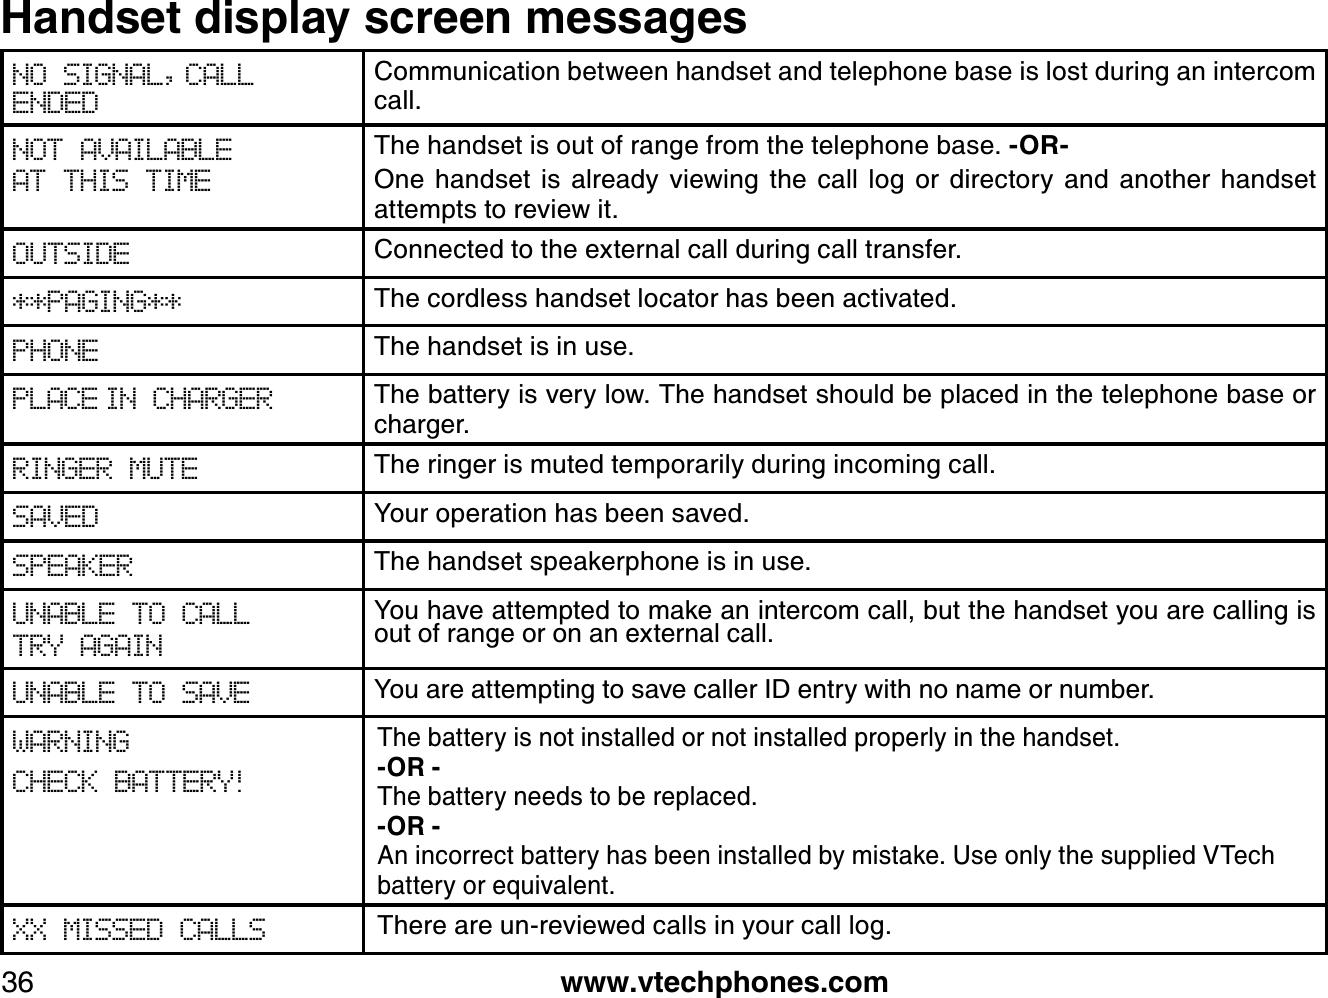 www.vtechphones.com36Handset display screen messagesNO SIGNAL, CALL     ENDEDCommunication between handset and telephone base is lost during an intercom call.NOT AVAILABLE AT THIS TIMEThe handset is out of range from the telephone base. -OR-One  handset  is  already  viewing  the  call  log  or  directory  and  another  handset attempts to review it.OUTSIDE Connected to the external call during call transfer.**PAGING** The cordless handset locator has been activated.PHONE The handset is in use.PLACE IN CHARGER The battery is very low. The handset should be placed in the telephone base or charger.RINGER MUTE The ringer is muted temporarily during incoming call.SAVED Your operation has been saved.SPEAKER The handset speakerphone is in use.UNABLE TO CALLTRY AGAINYou have attempted to make an intercom call, but the handset you are calling is out of range or on an external call.UNABLE TO SAVE You are attempting to save caller ID entry with no name or number.WARNING                           CHECK BATTERY! The battery is not installed or not installed properly in the handset.-OR -The battery needs to be replaced.-OR -An incorrect battery has been installed by mistake. Use only the supplied VTech battery or equivalent.XX MISSED CALLS There are un-reviewed calls in your call log.